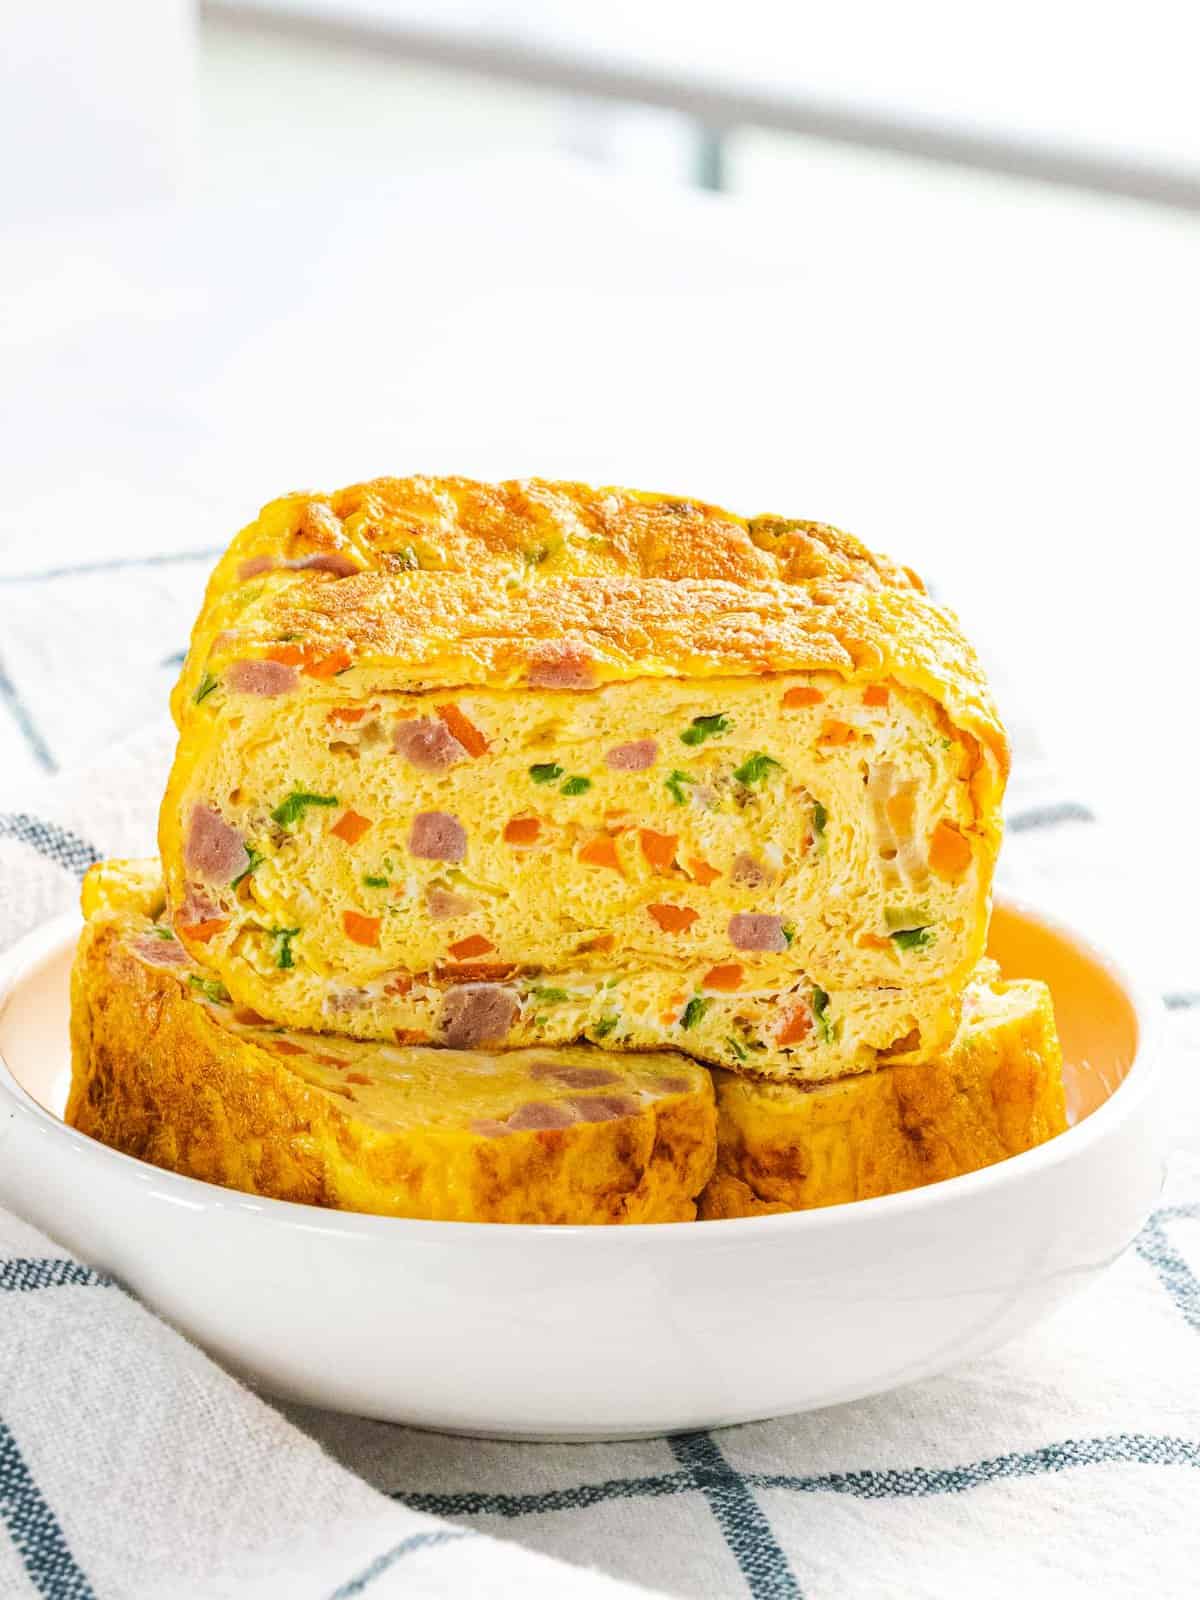 Korean rolled egg omelet or gyeran mari with ham, carrots, and green onions.